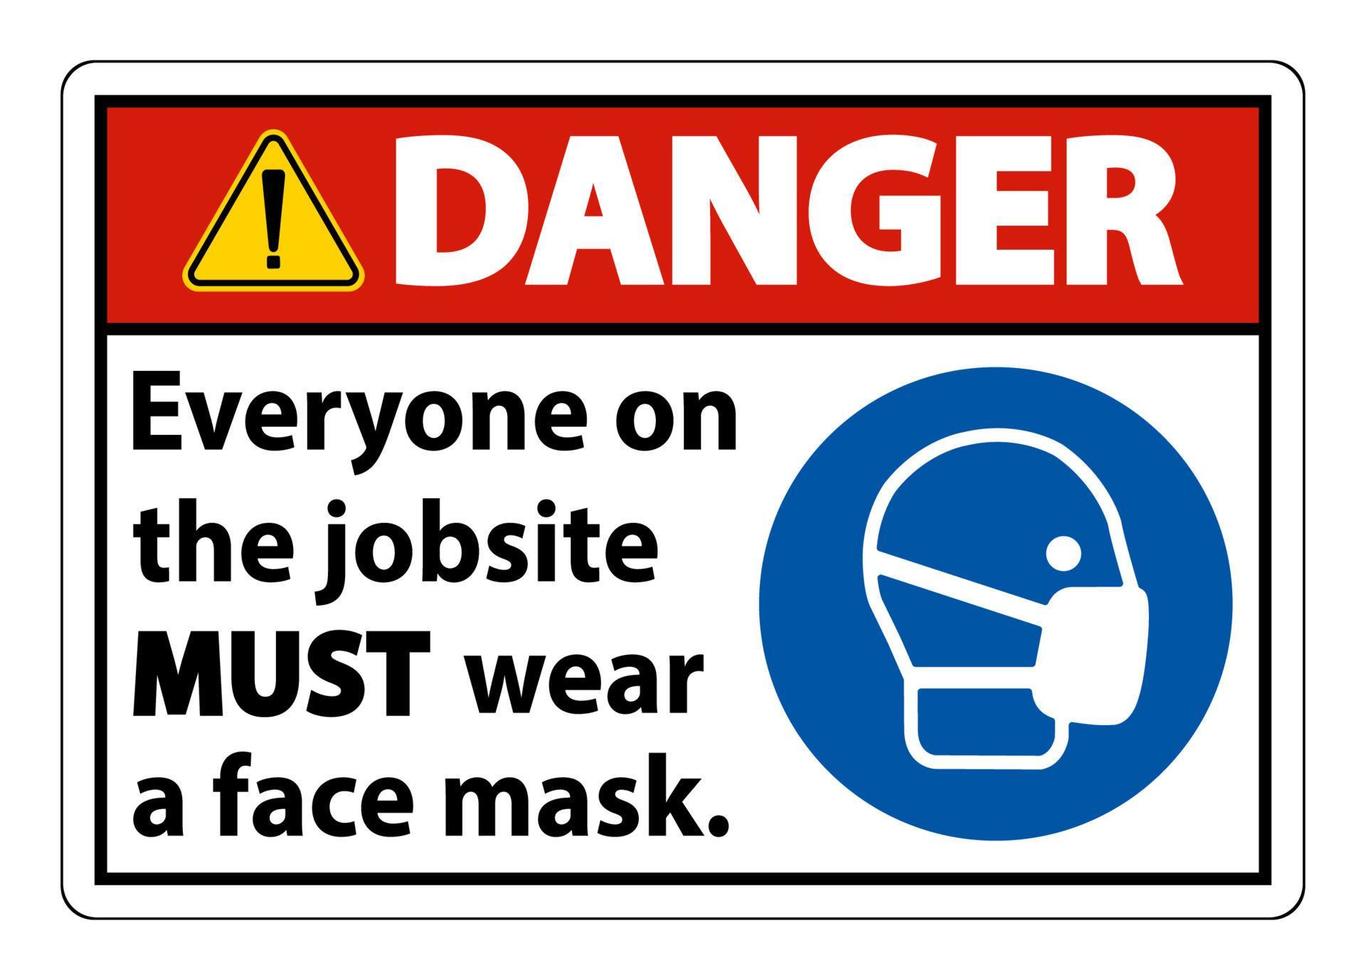 Danger Wear A Face Mask Sign Isolate On White Background vector